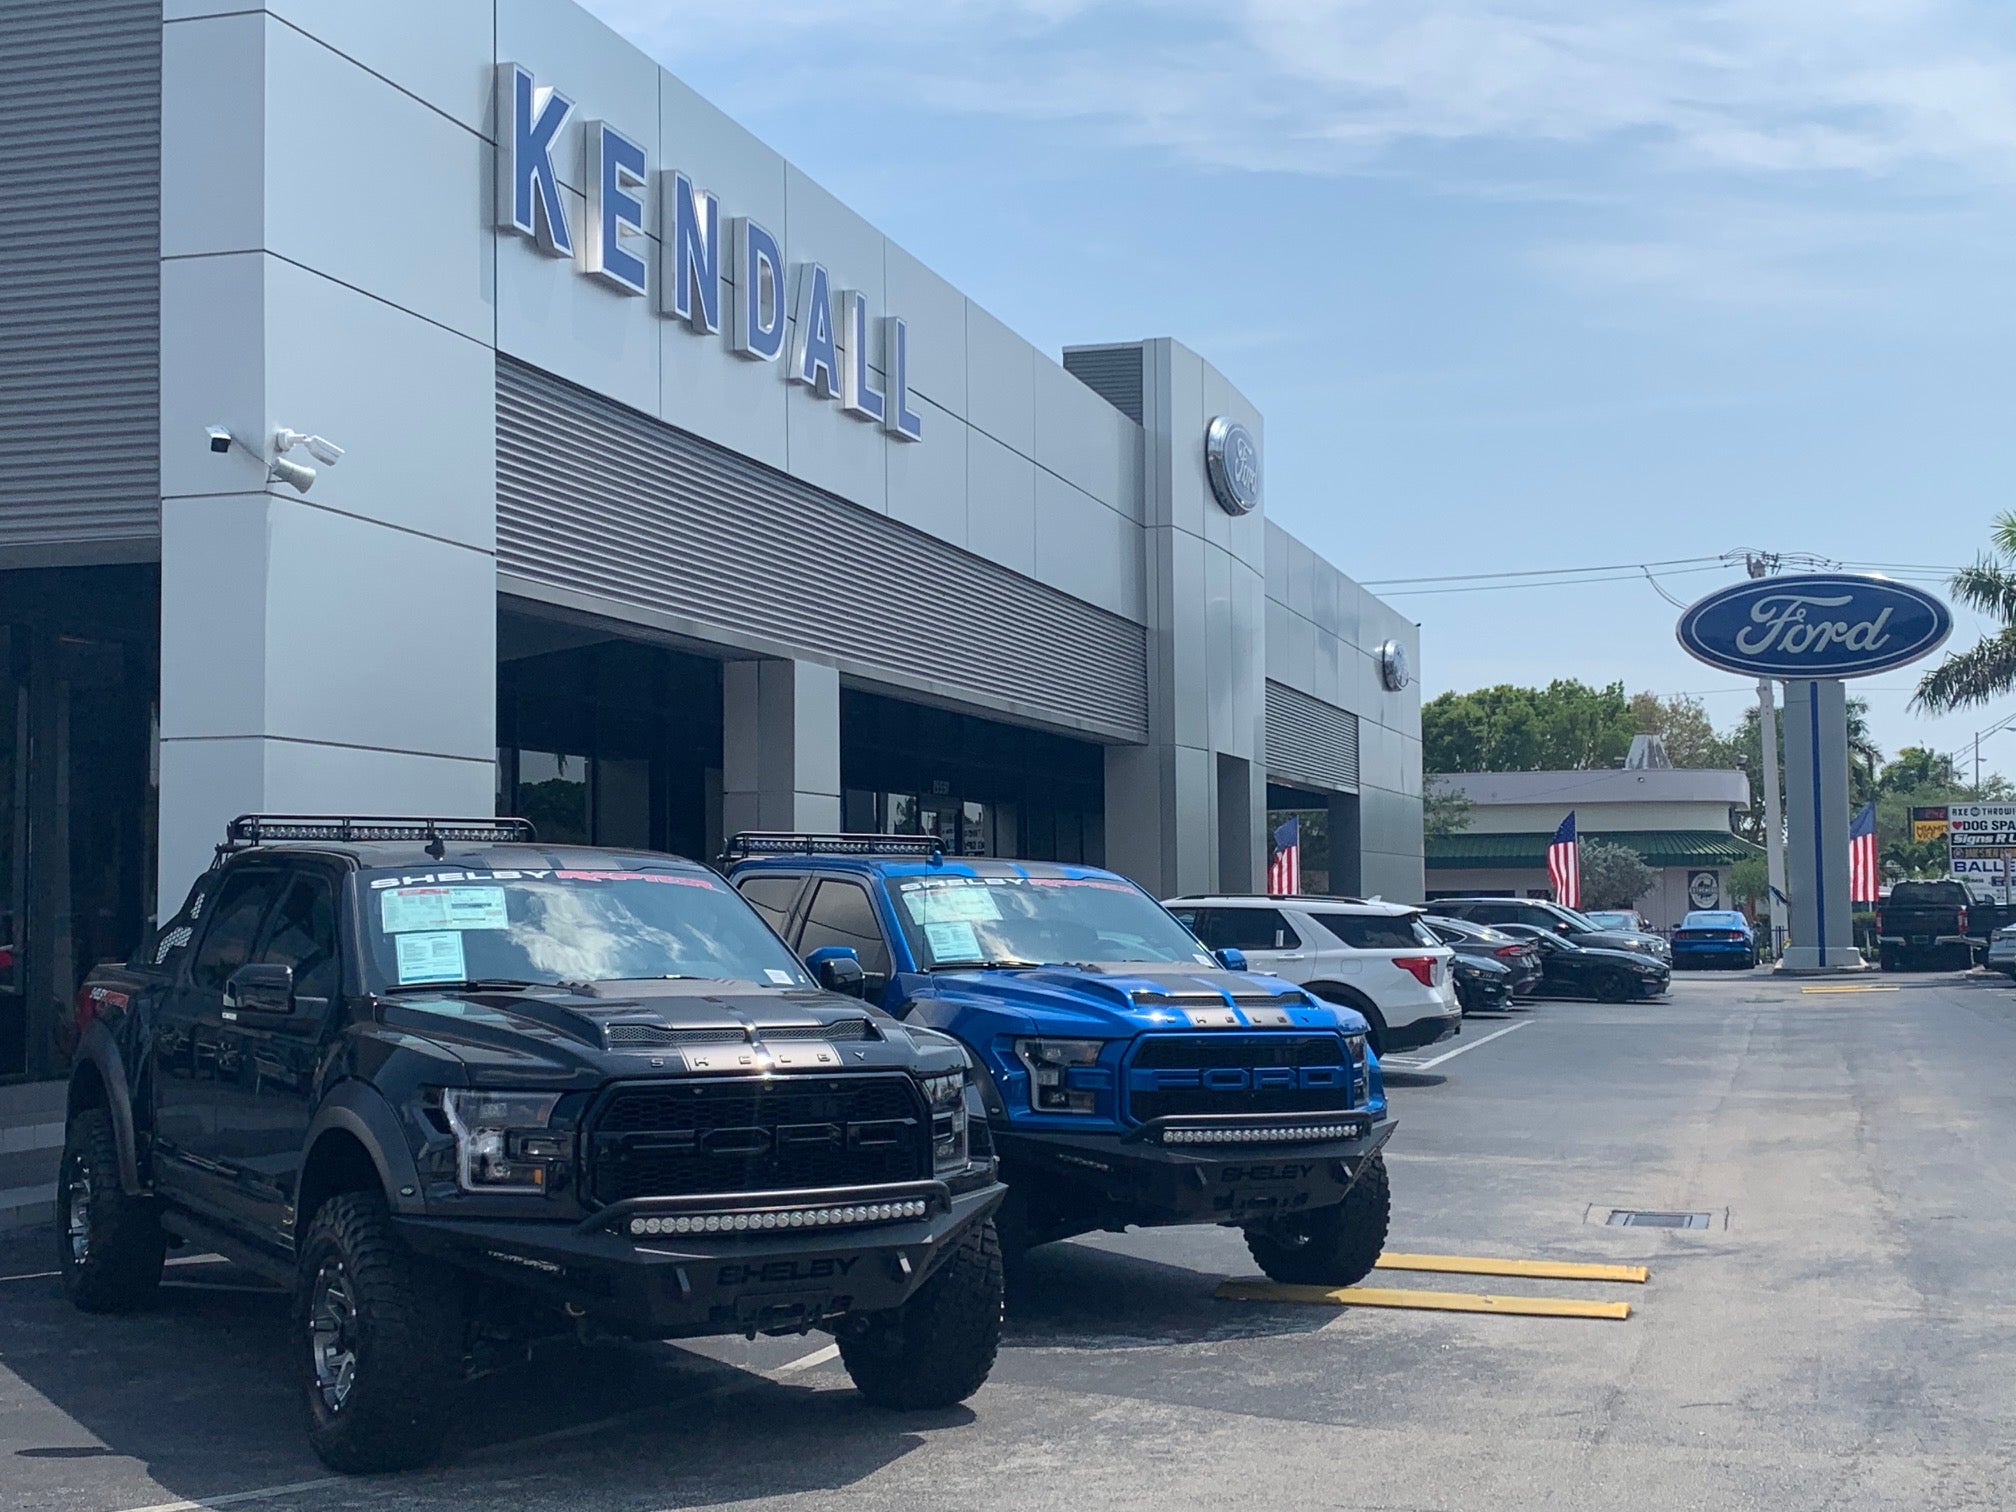 Ford of Kendall in Miami FL